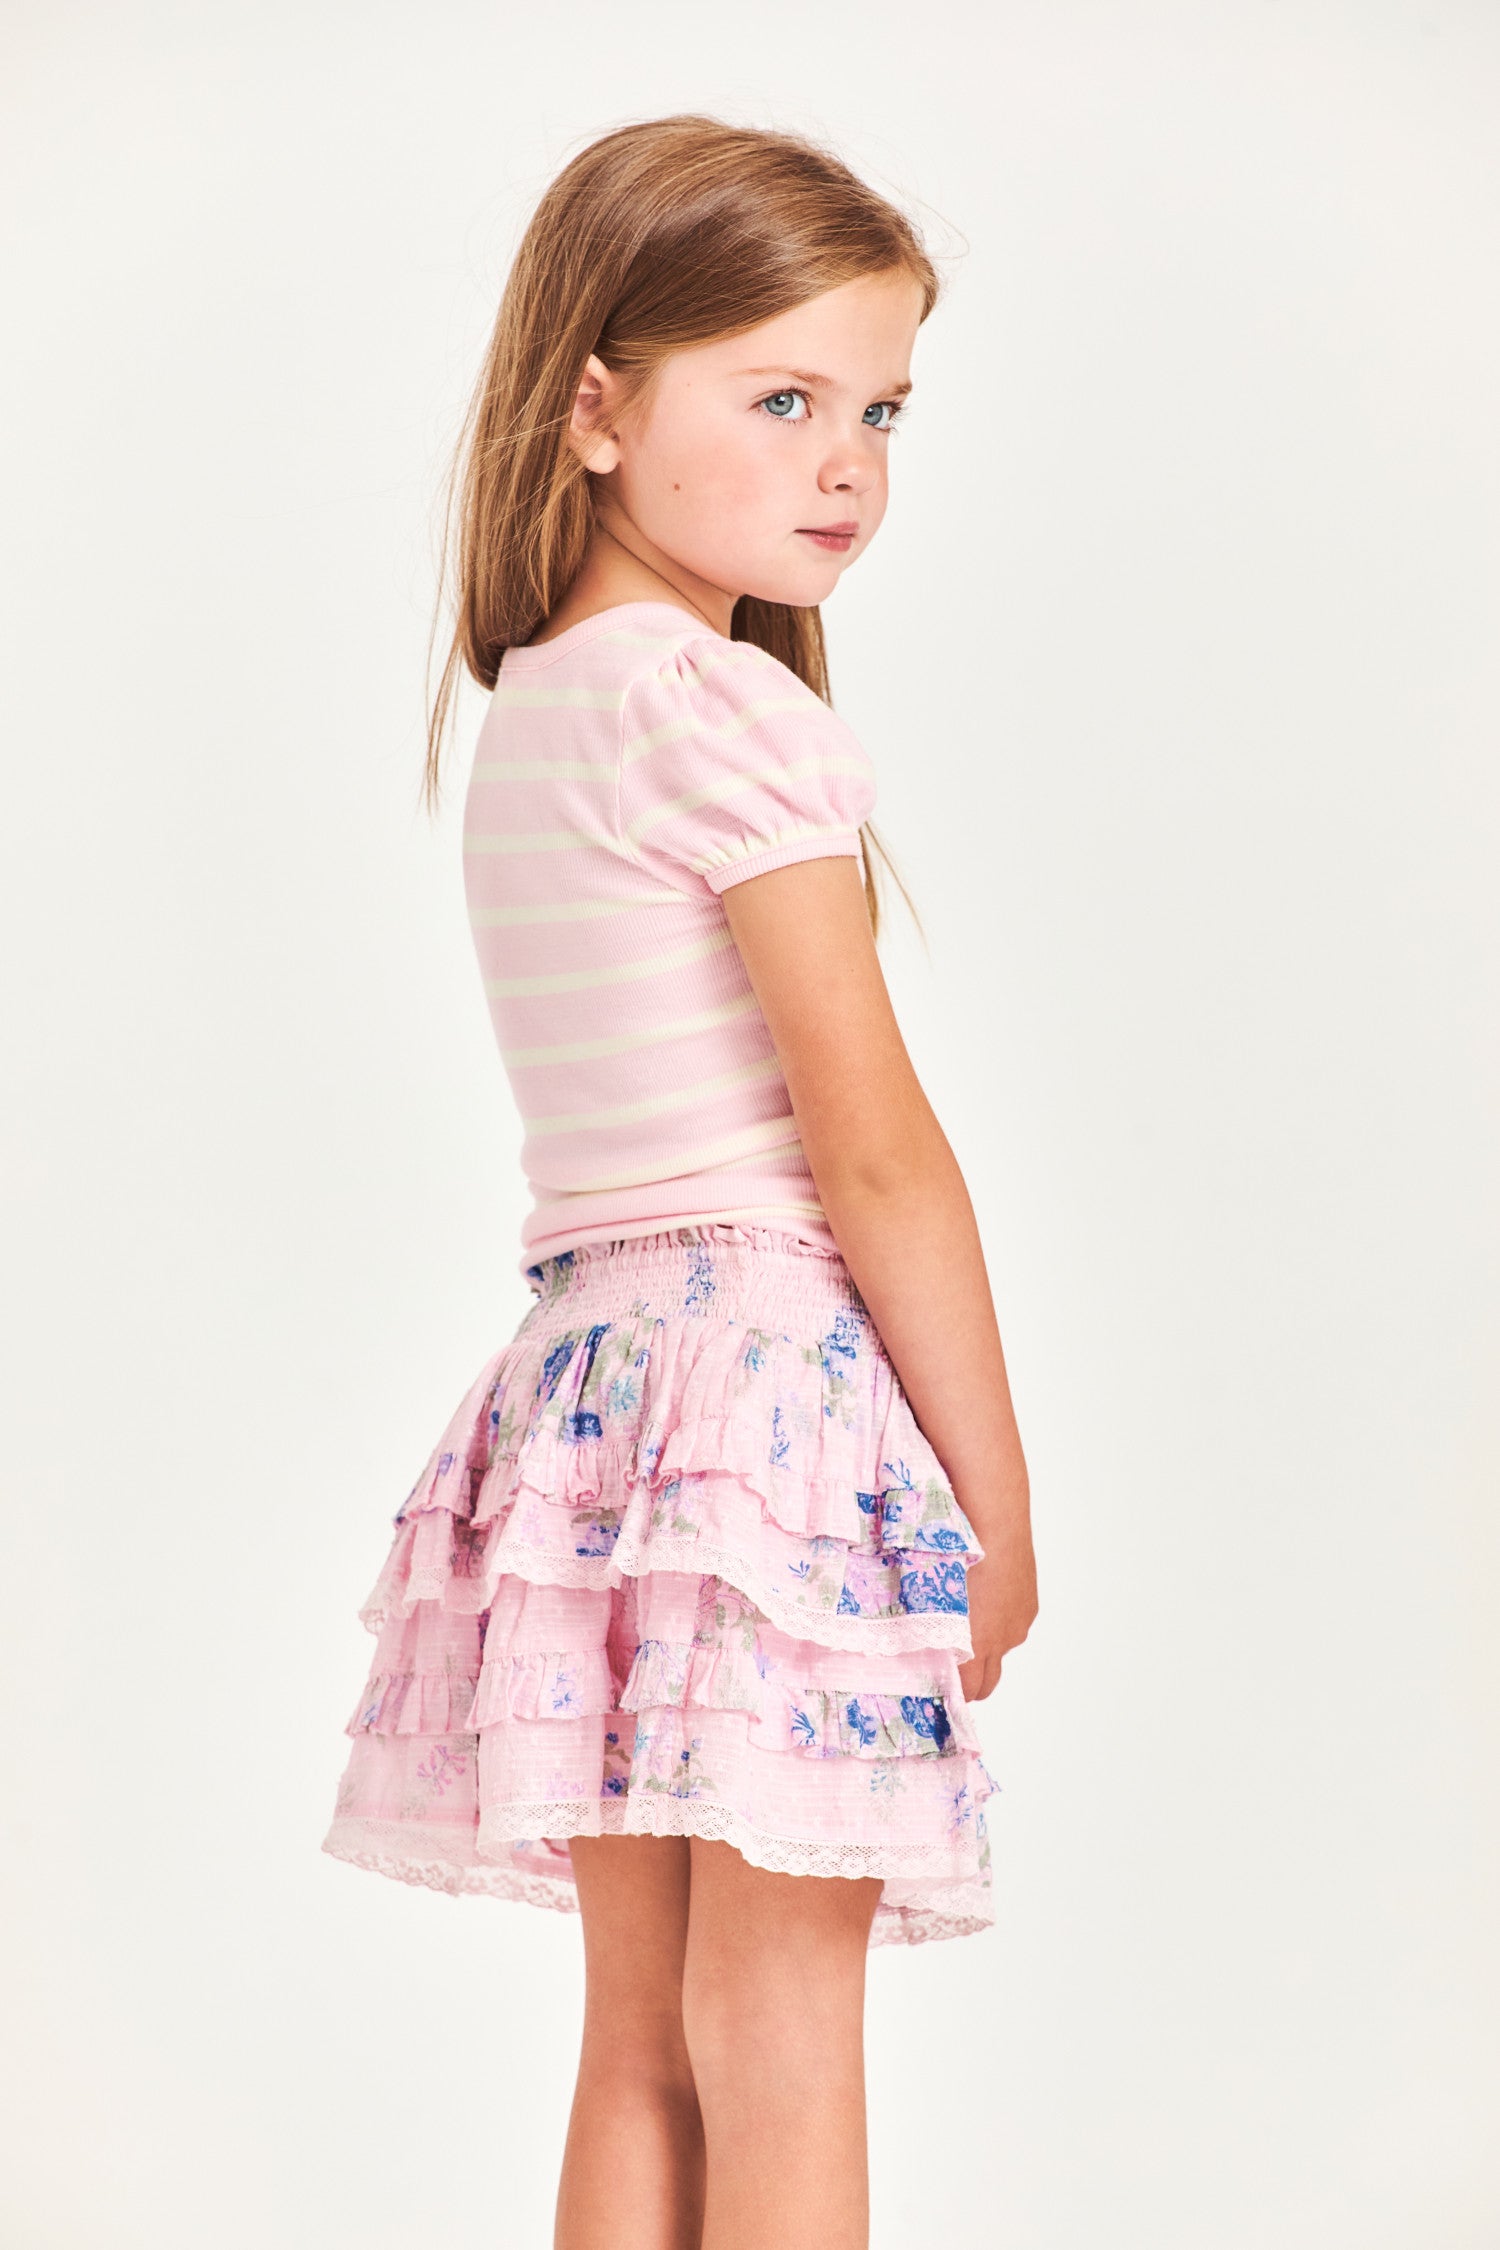 The Billie Skirt is 100% cotton and features a wide smocked waistband with two shirred tiers and ruffle detailing. It is a beautiful baby pink with blue flower detailing.  